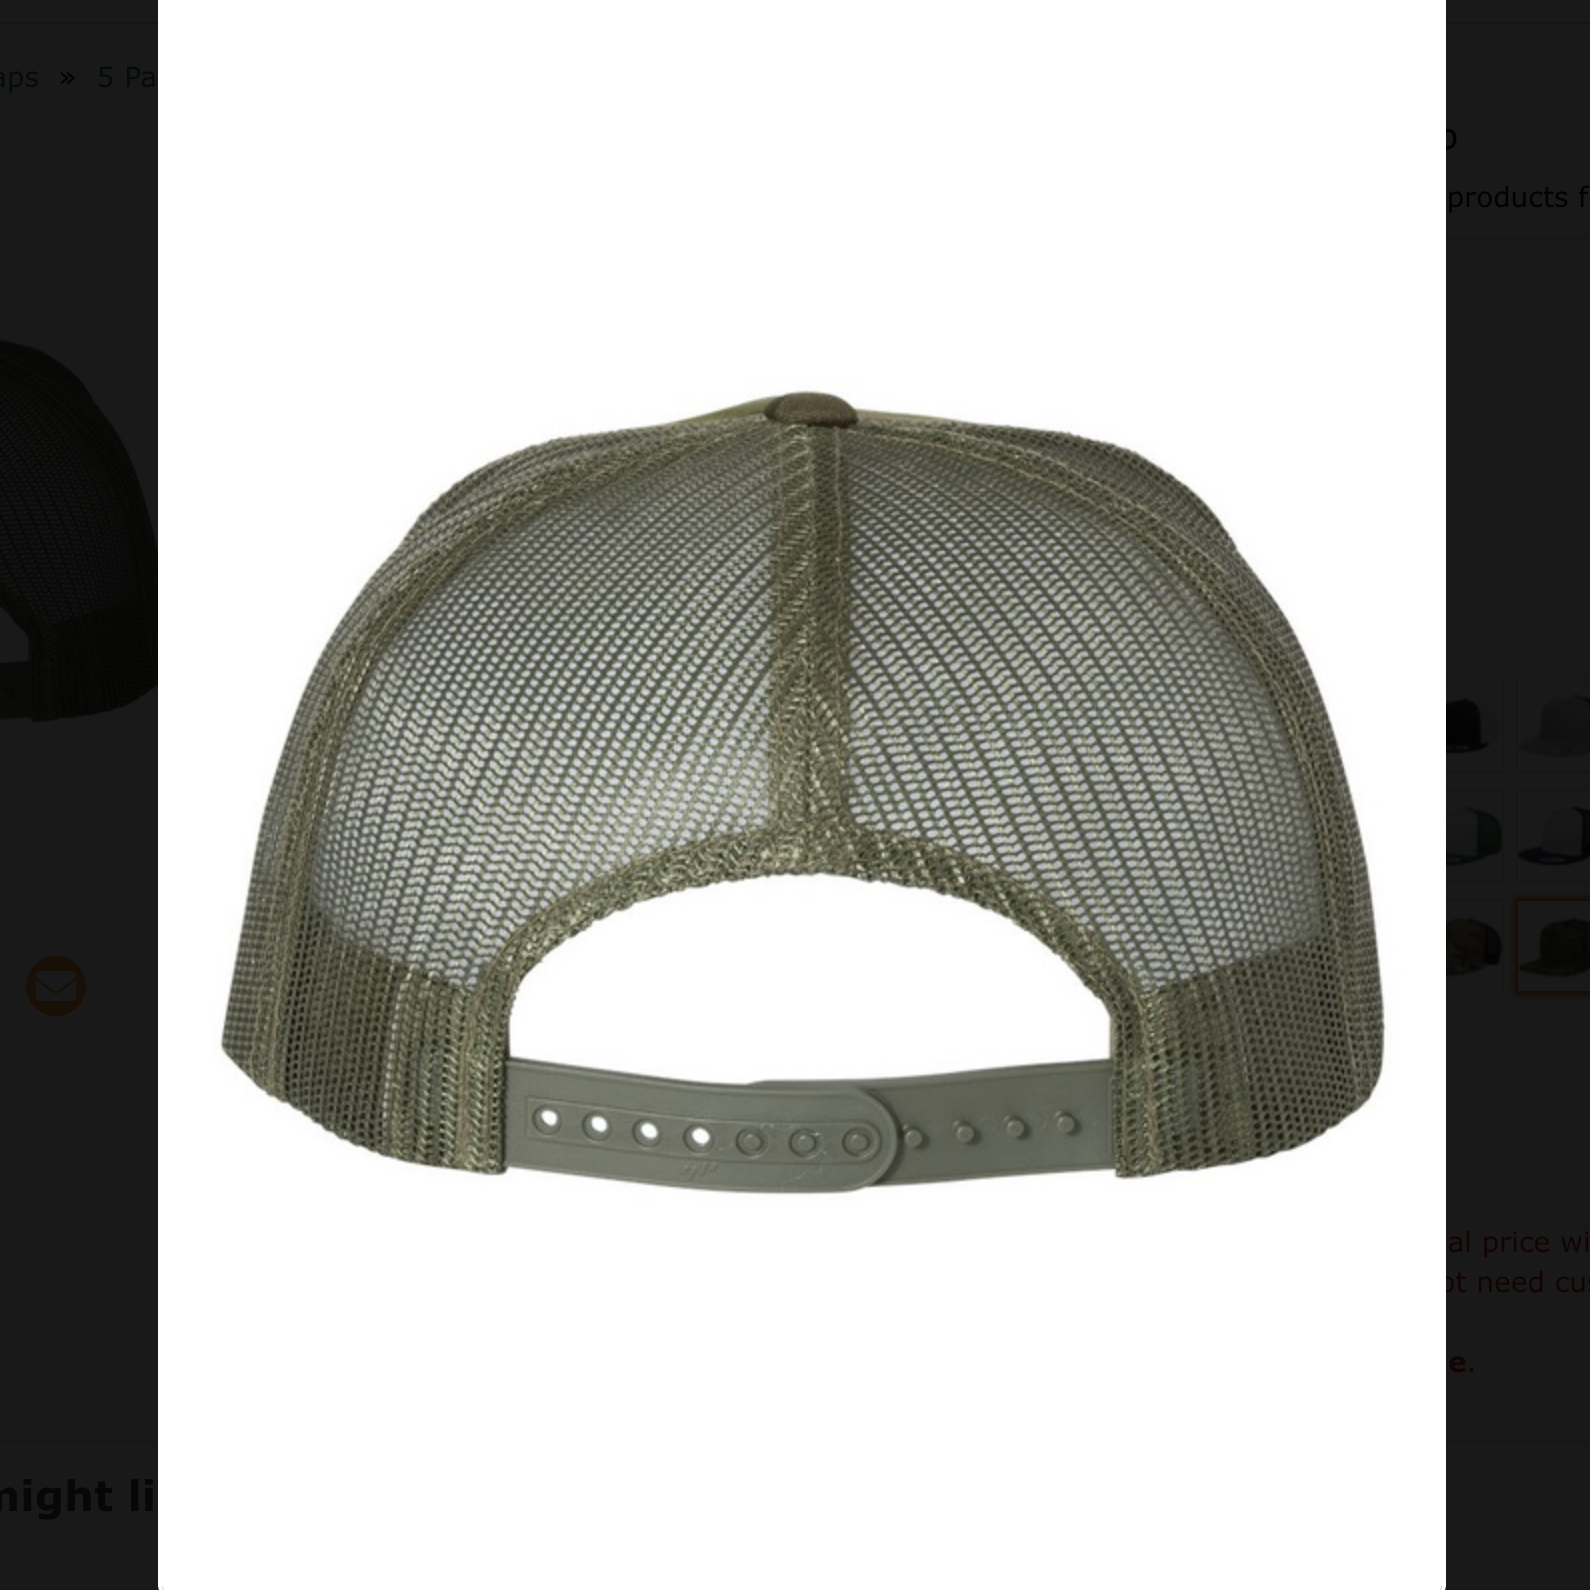 Classic 5 Panel Trucker Hat KIND CALIBER Multicam Tropic Canvas Green Mesh One Size Fits Most